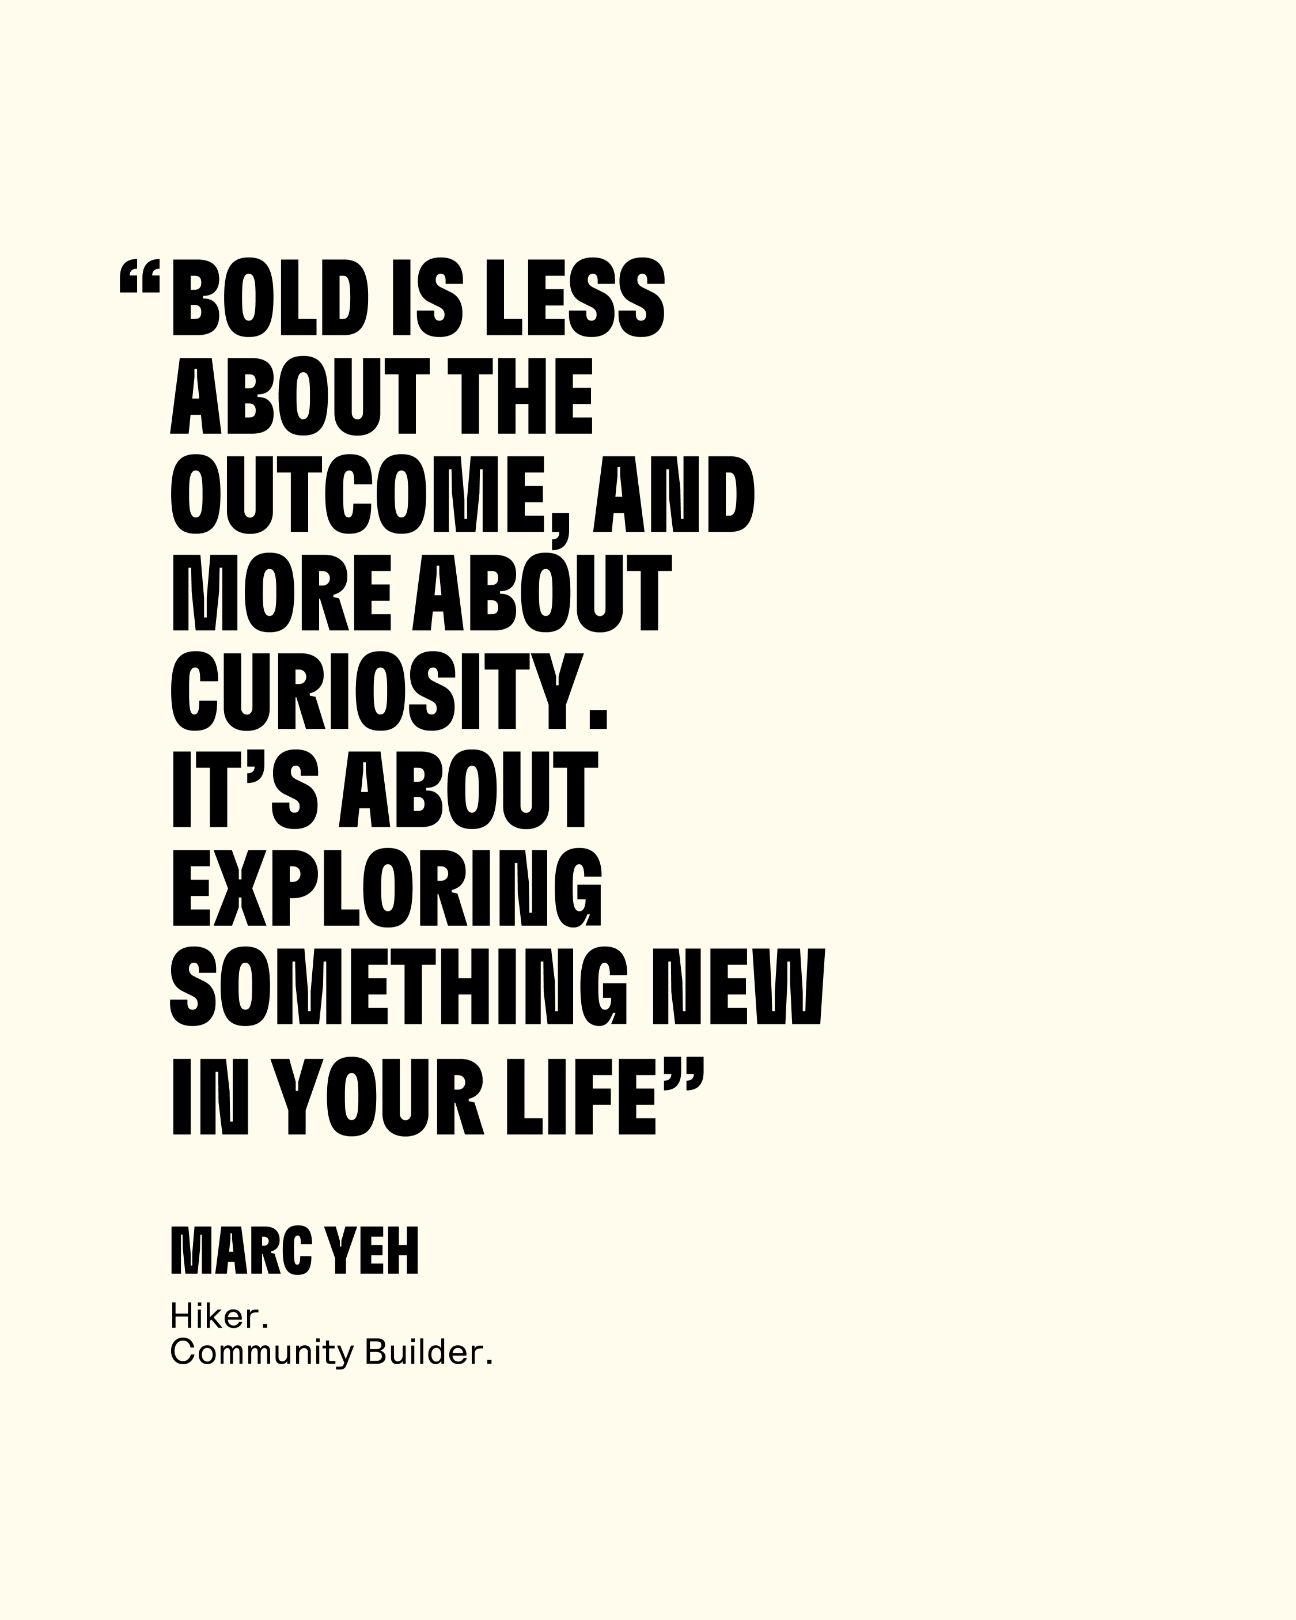 Bold is less about the outcome, and more about curiosity. It's about exploring something new in your life. Marc Yeh Hiker Community Leader